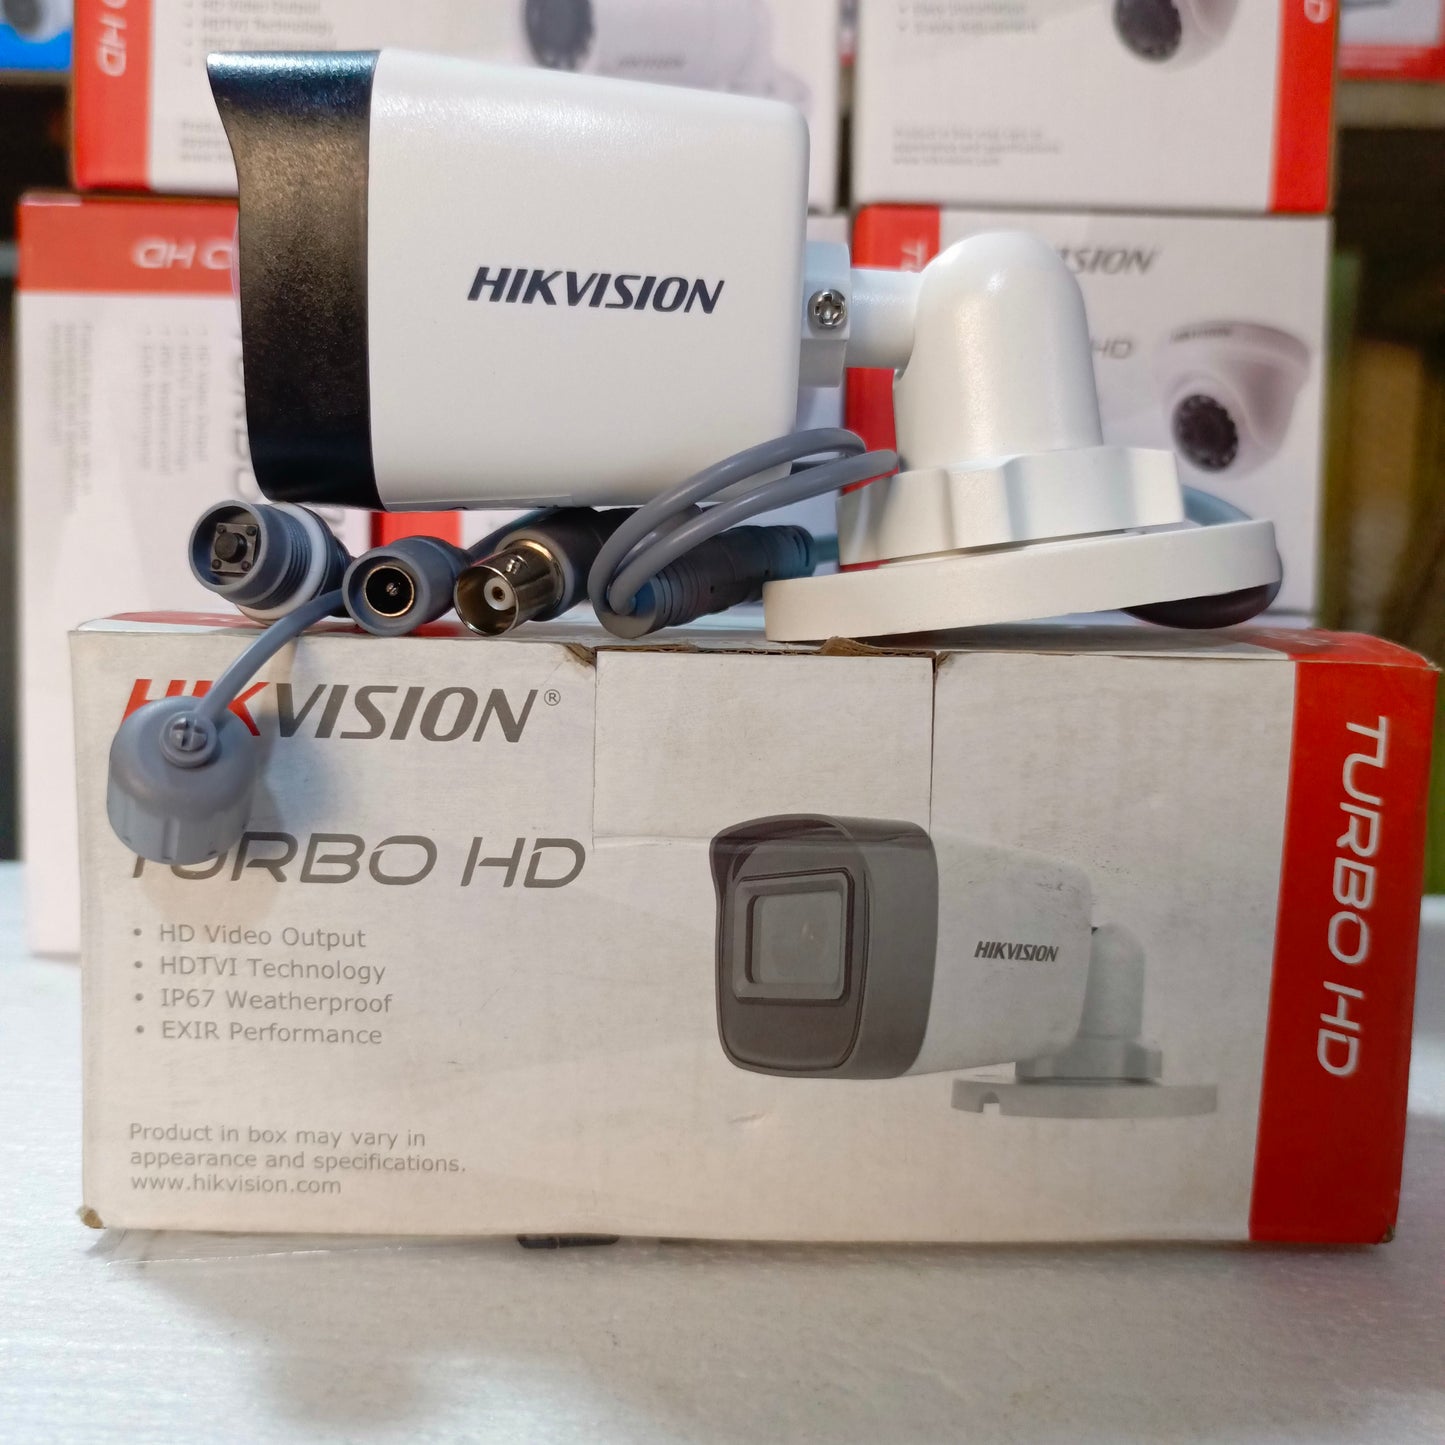 HIKVISION Turbo HD Indoor/Outdoor EXIR Bullet Camera (3.6mm 2MP Lens) - Side View